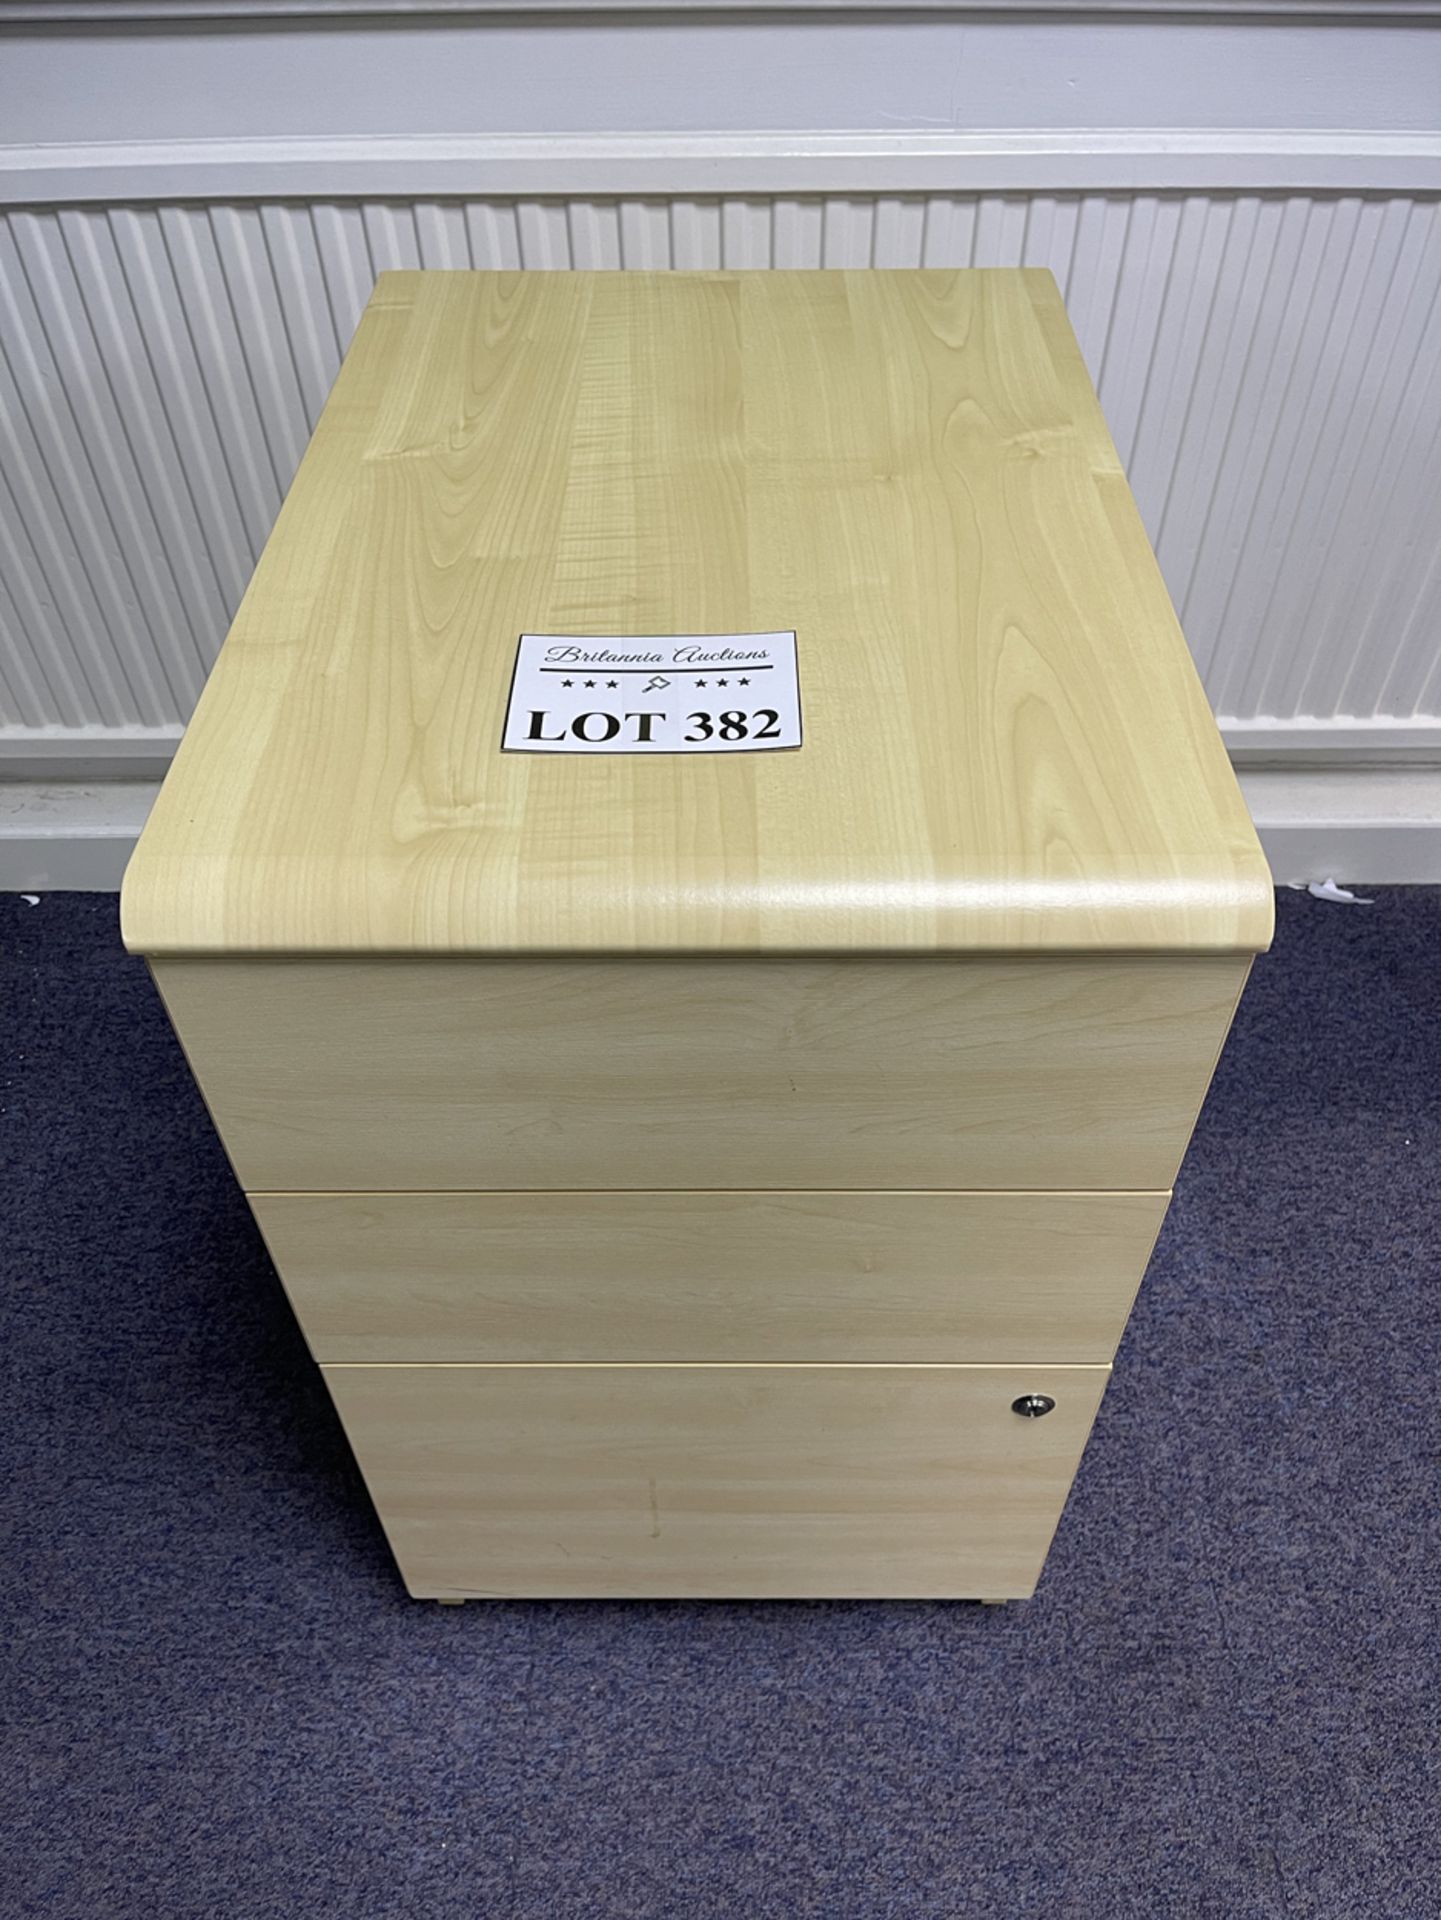 Set of Office Drawers. Dimensions 430mm x 600mm x 730mm High Approx.